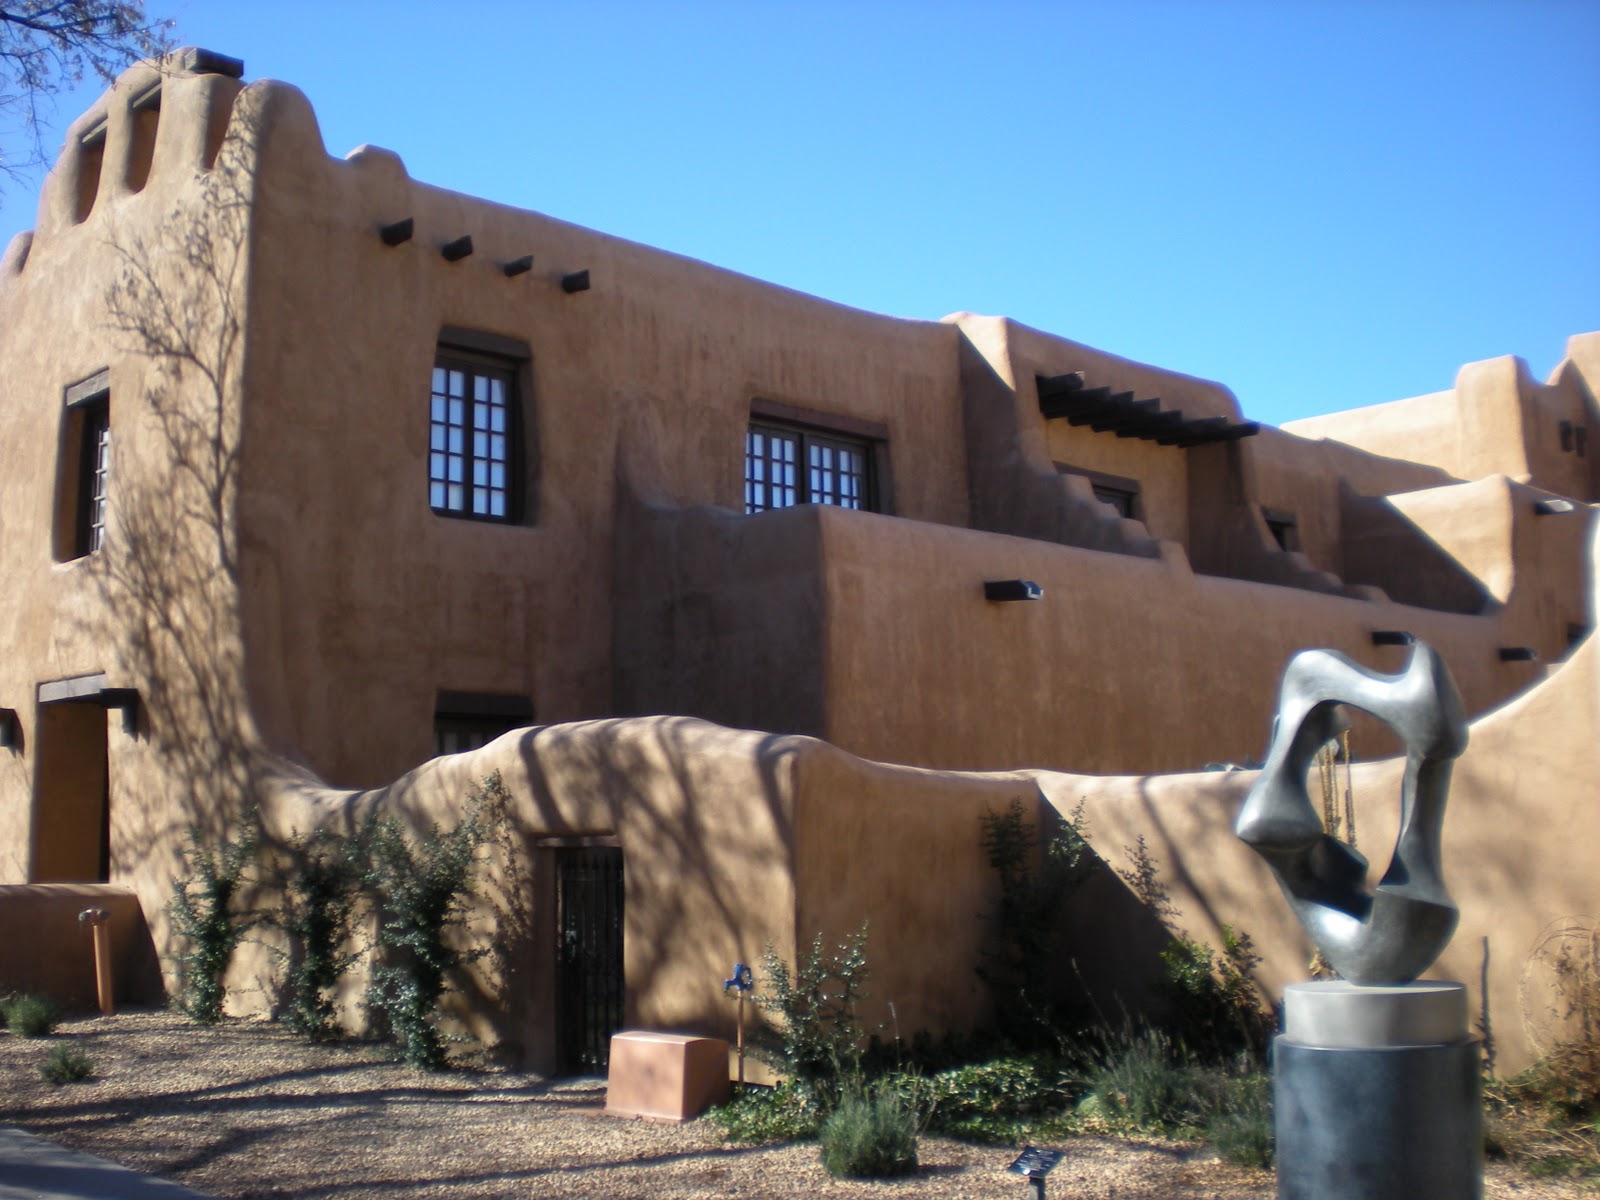 Cruisin' Museums with Jonette Slabey: New Mexico Museum of Art, Santa Fe NM